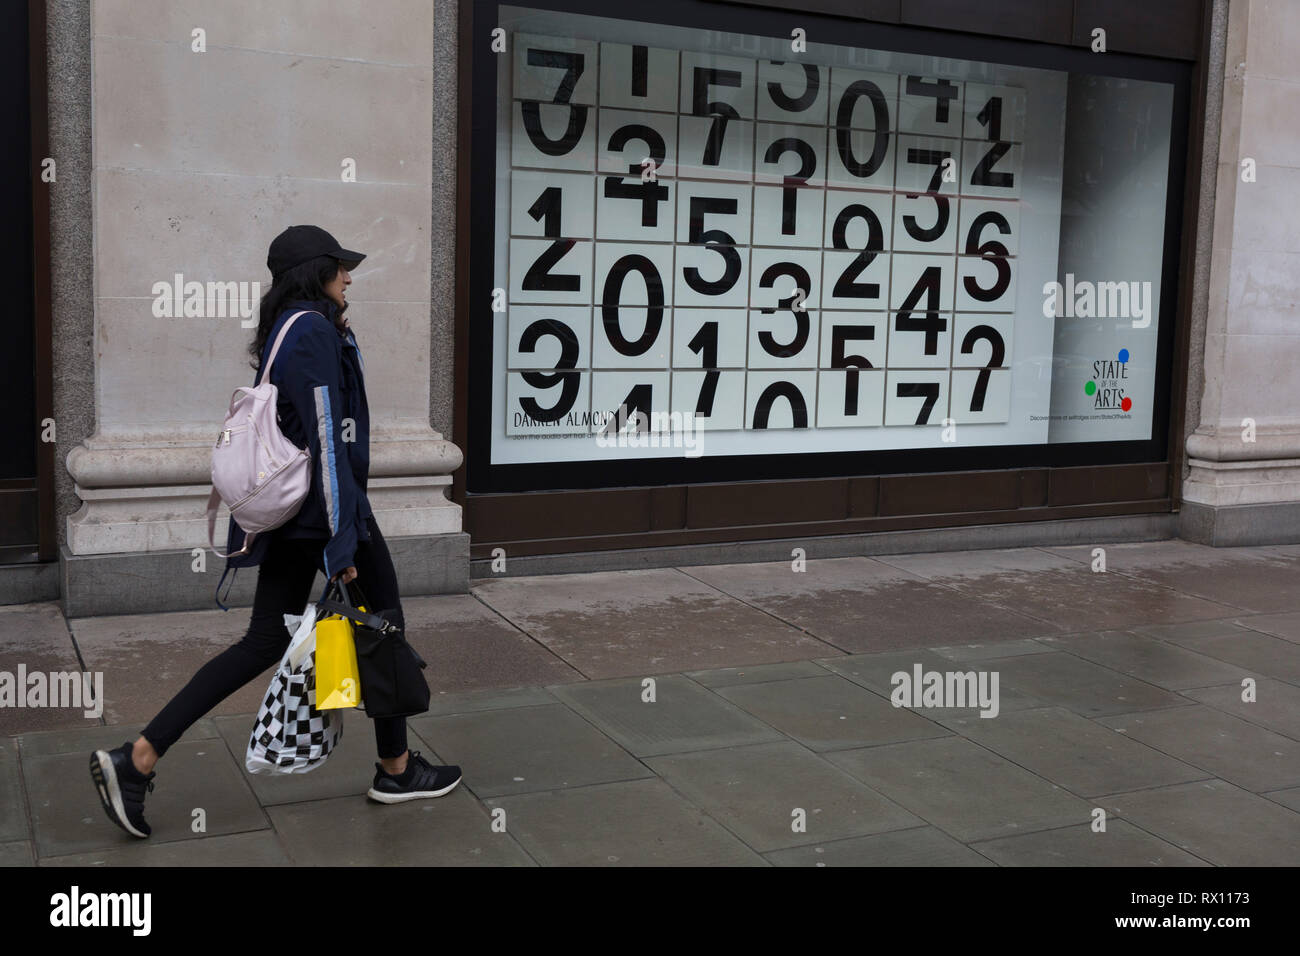 A shopper walks past a window display that features numbers - part of a design theme called 'State of the Arts', at the Selfridges department store on Oxford Street, on 4th March 2019, in London England. Darren Almond's piece ‘Chance Encounter 004’, consists of a grid formed from rectangular panels, featuring fragmented numbers that appear to scroll across the surface.  State of the Arts is a gallery of works by nine crtically-acclaimed artists in Selfridges windows to celebrate the power of public art. Stock Photo